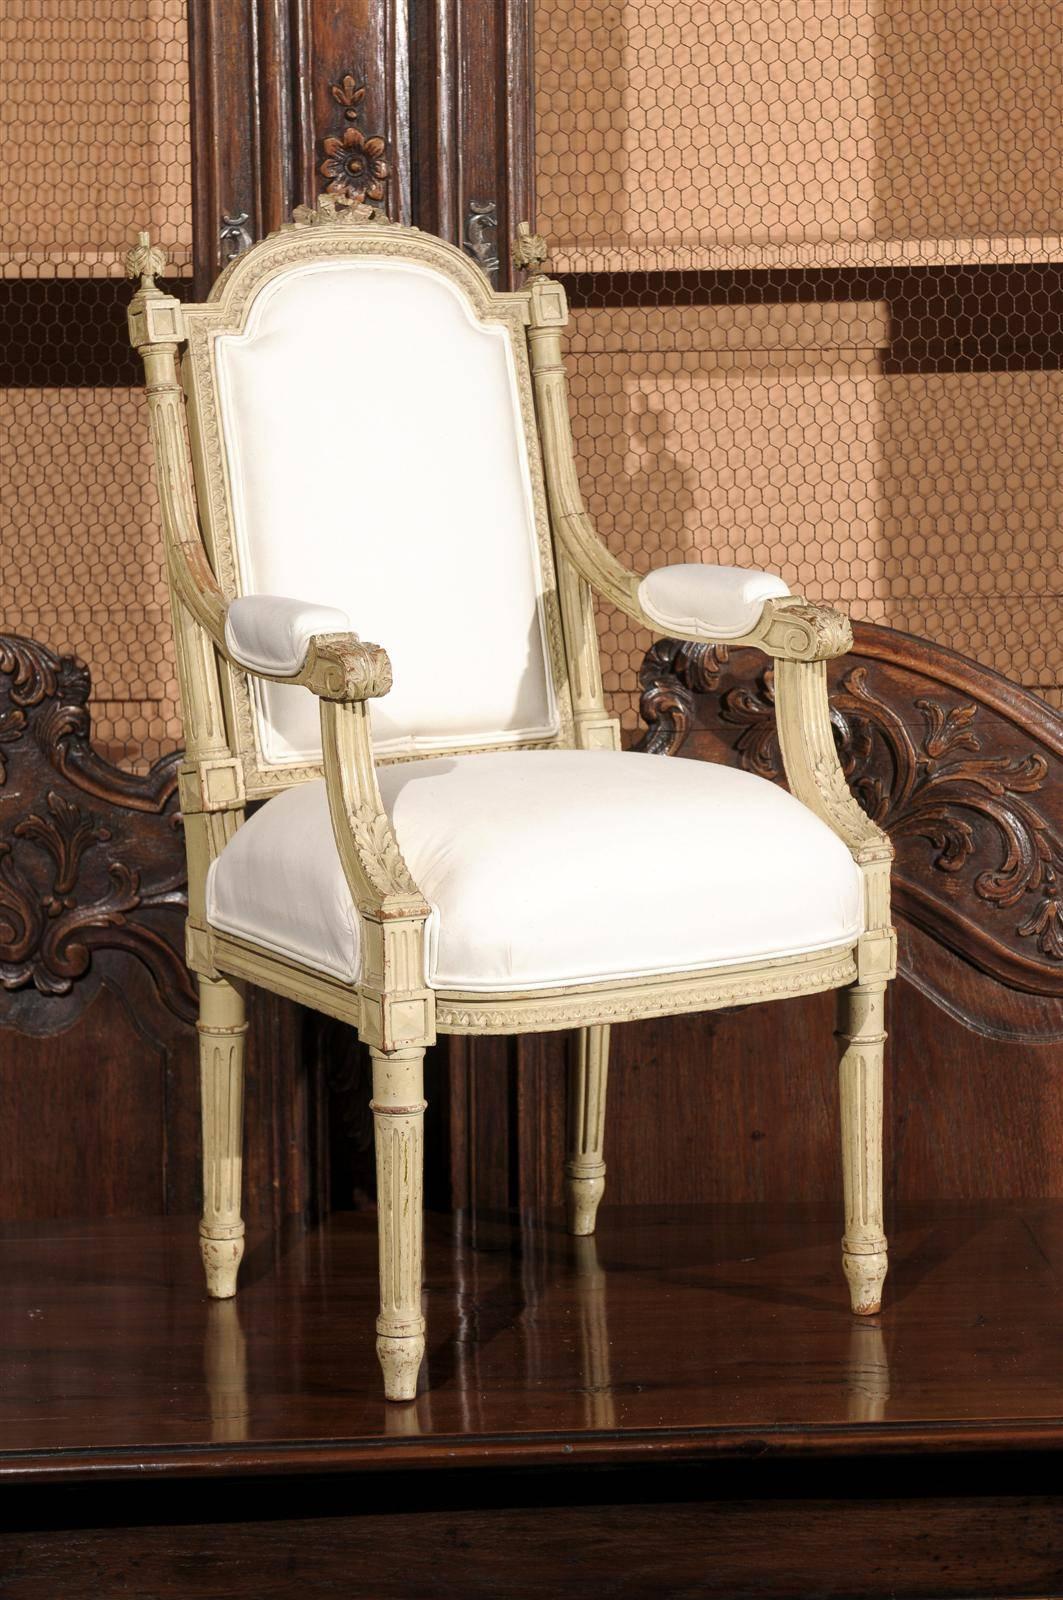 This French painted child’s chair from the early 20th century features a lovely carved and slightly slanted back with a Louis XVI style knot in the crest, flanked with two unusual finials resting on block joints at the top of fluted arms. The